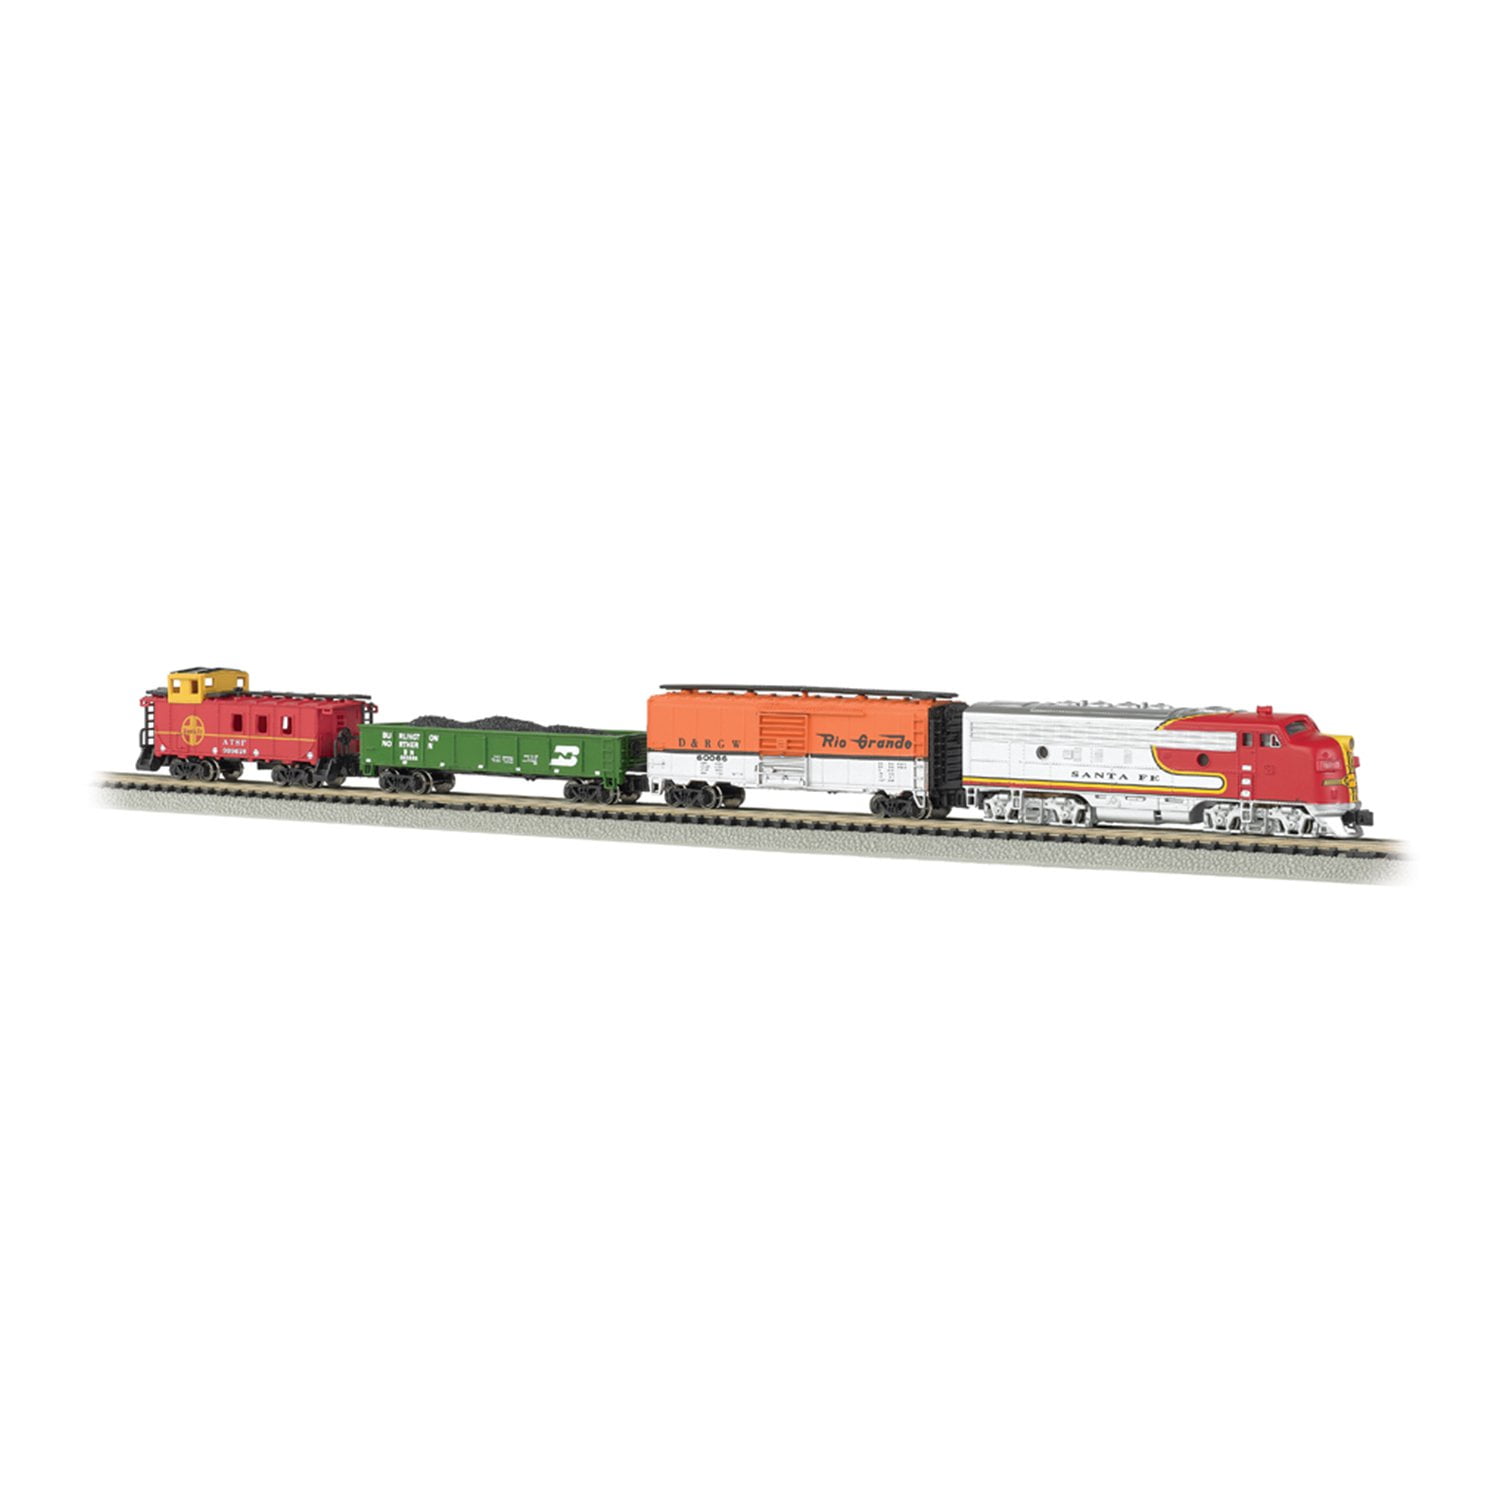 24021 Bachmann Super Chief Ready To Run Electric Train Set for sale online 